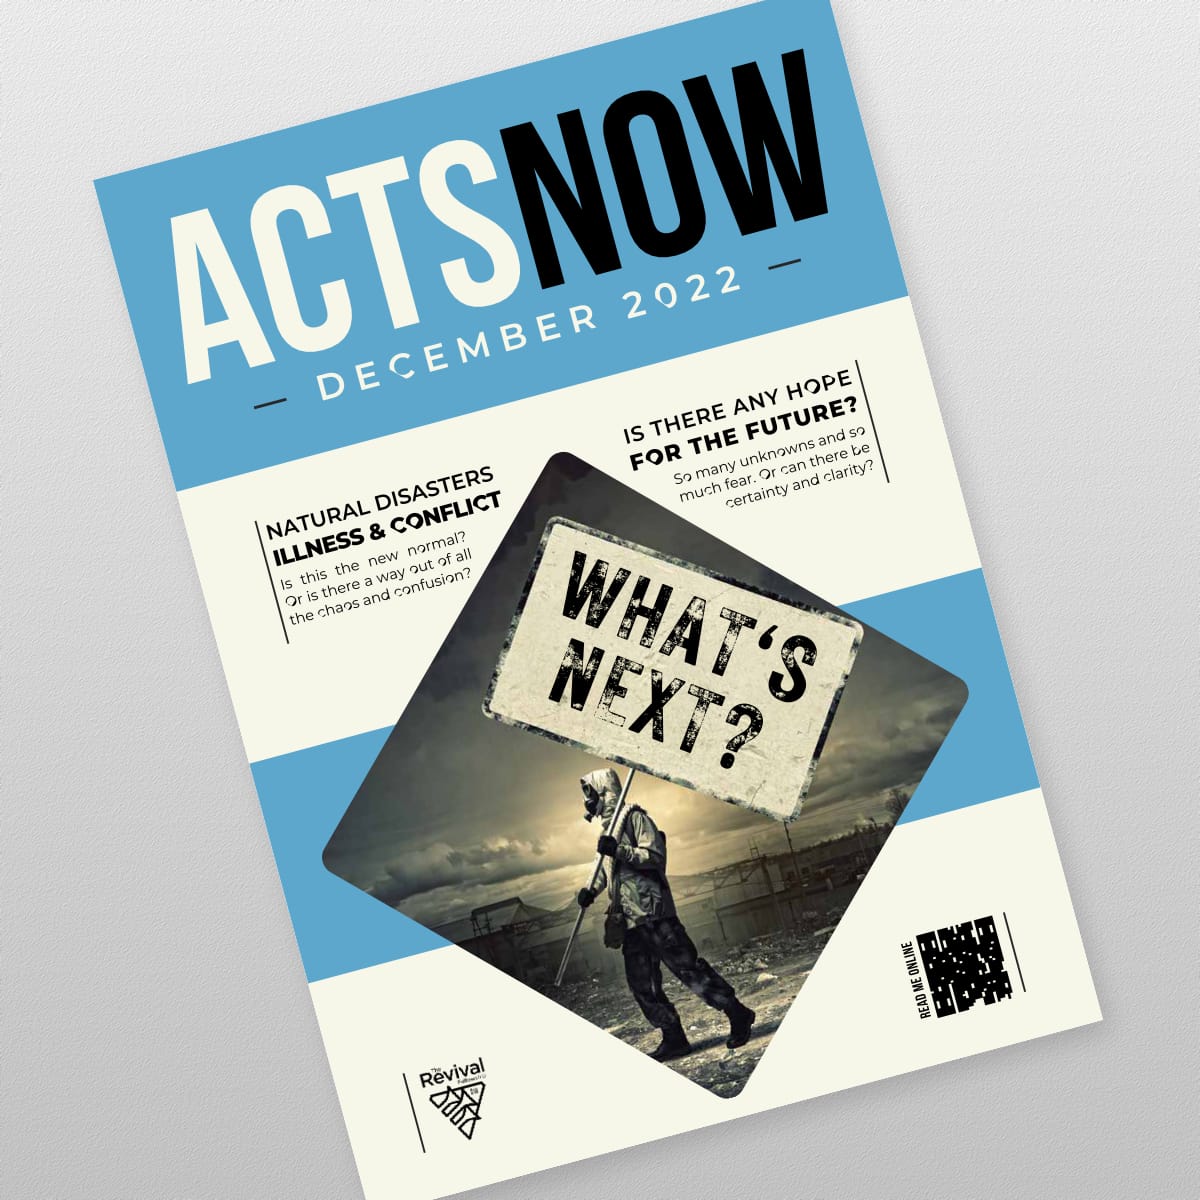 Featured image for “Acts Now Dec 2022”